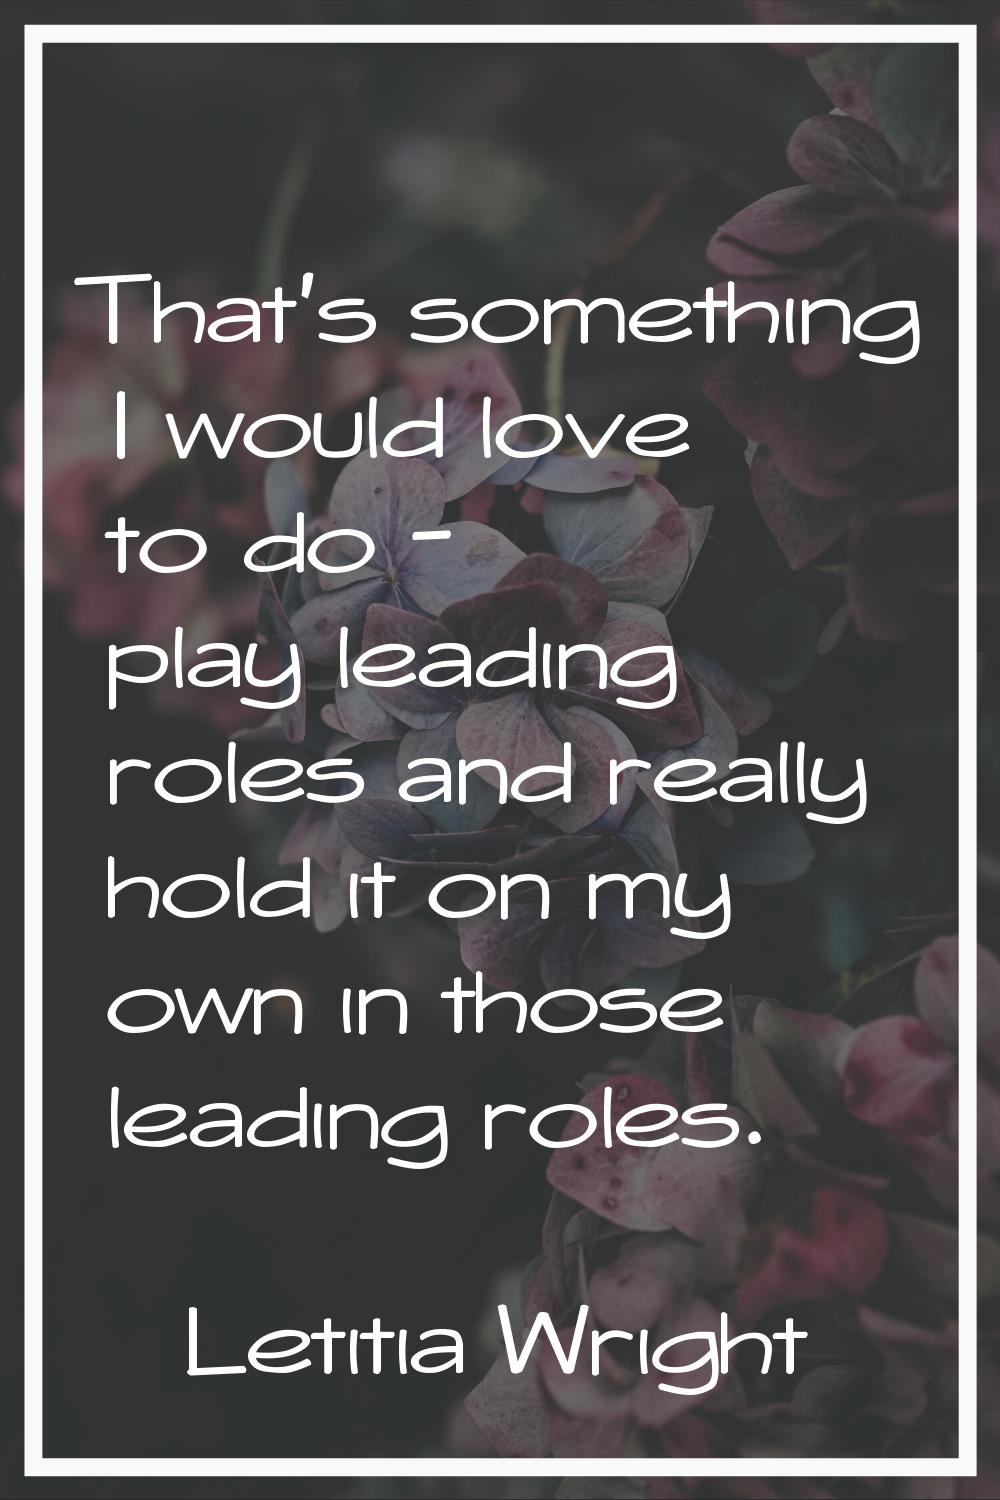 That's something I would love to do - play leading roles and really hold it on my own in those lead